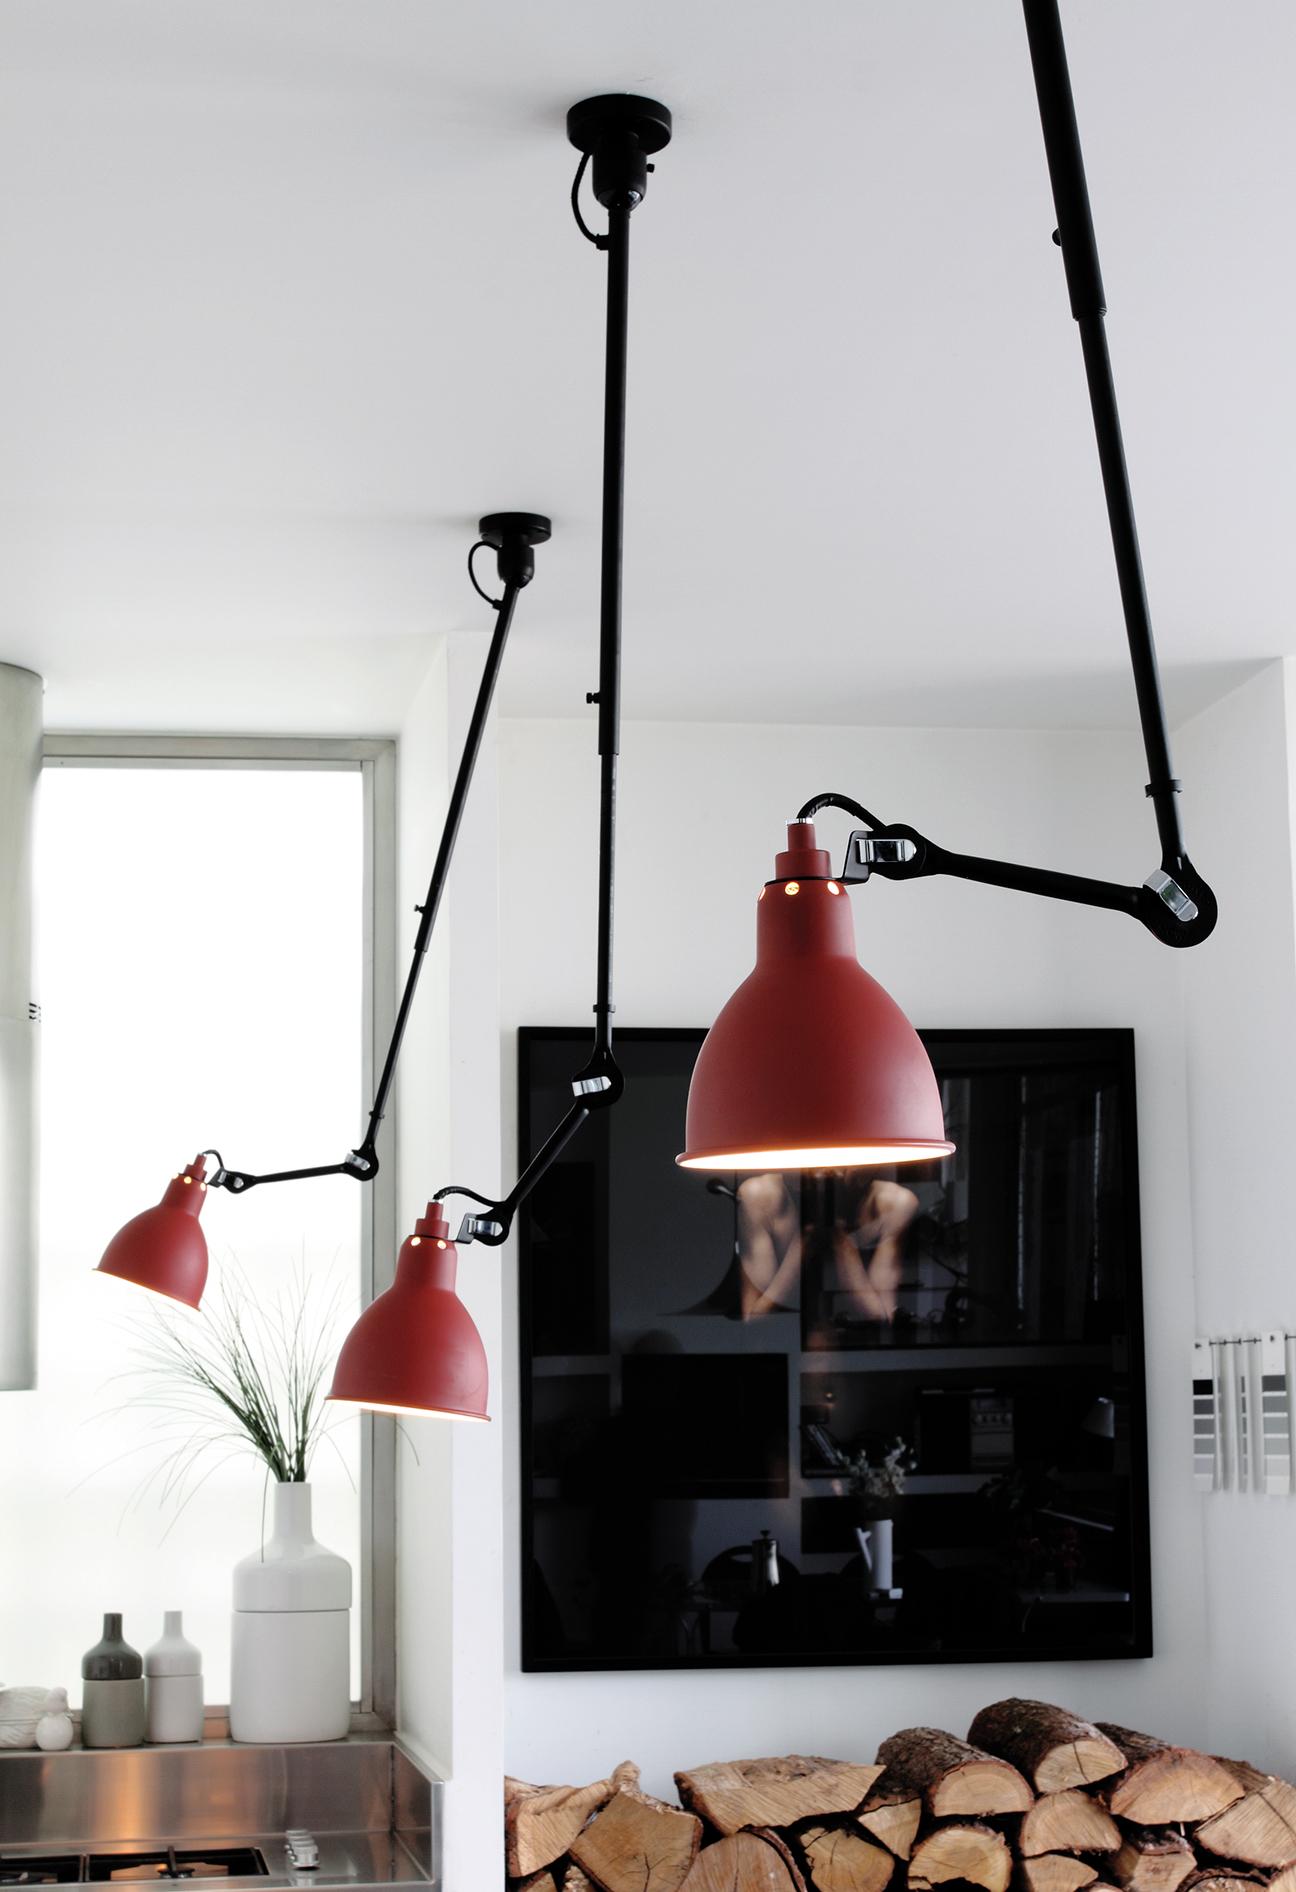 Steel DCW Editions La Lampe Gras N°302 Pendant Light in Black Arm and Black Shade For Sale